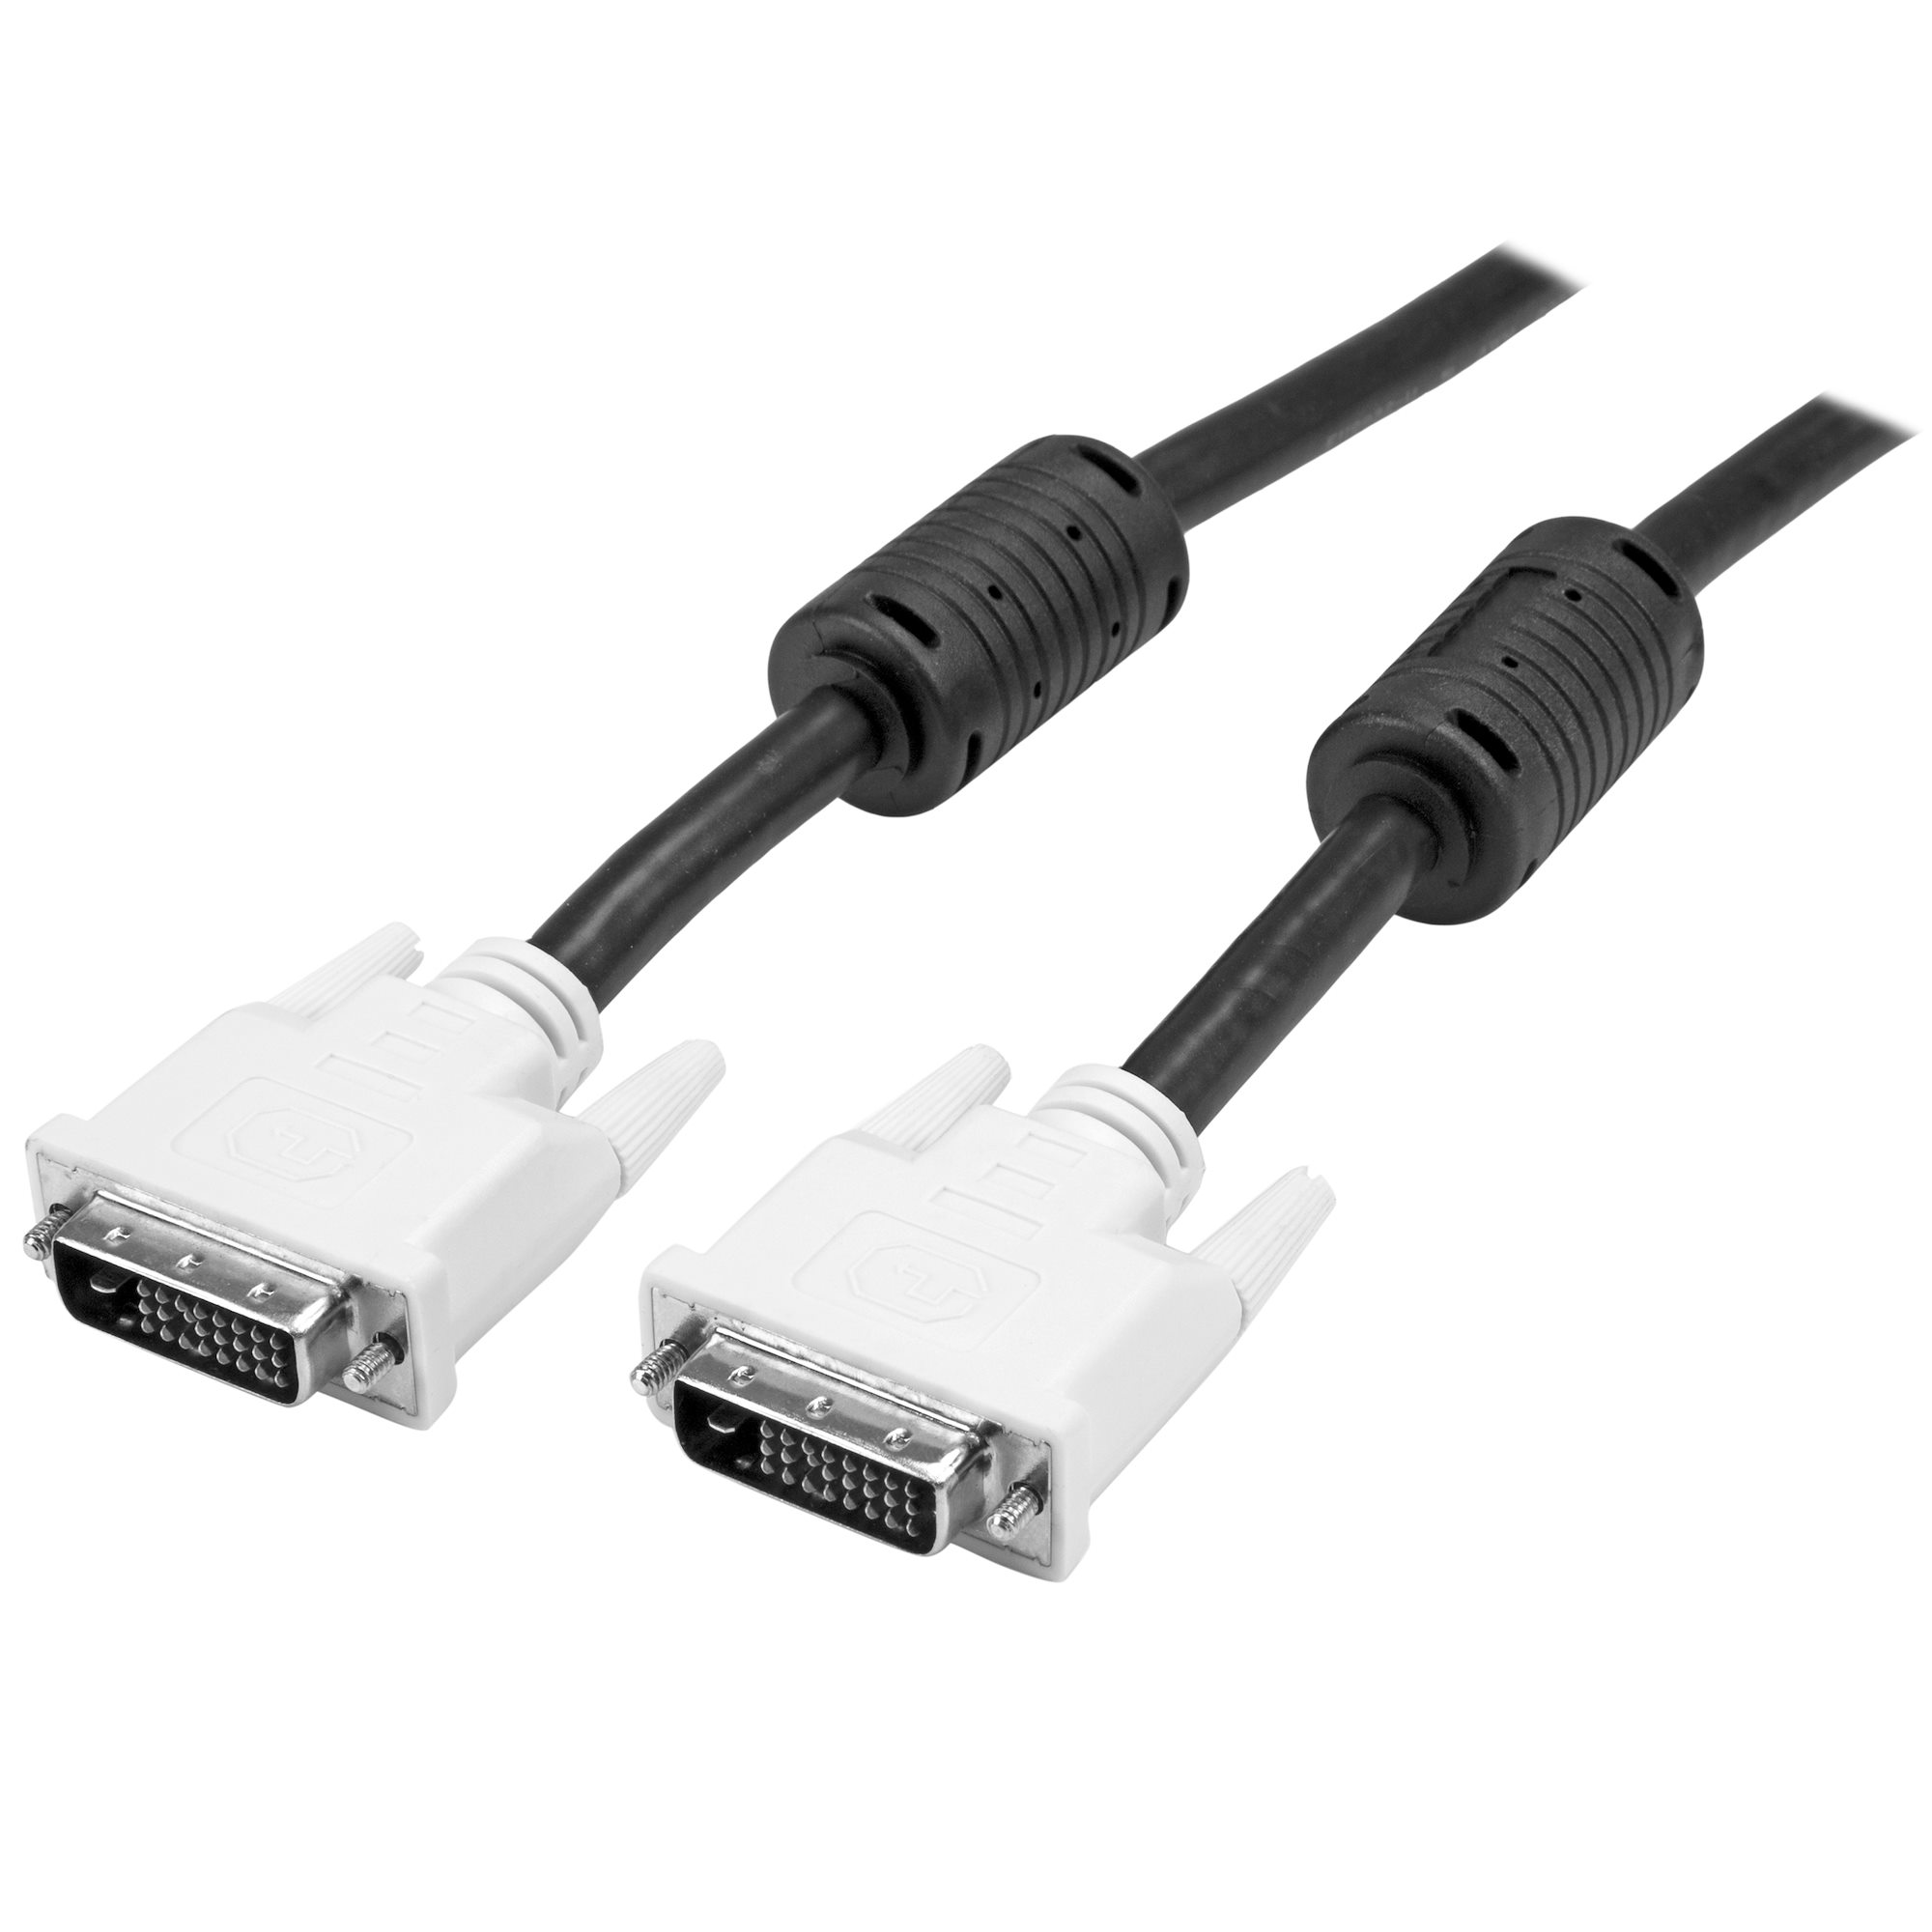 Cables Unlimited 10-Feet DVI D M to M Cable 